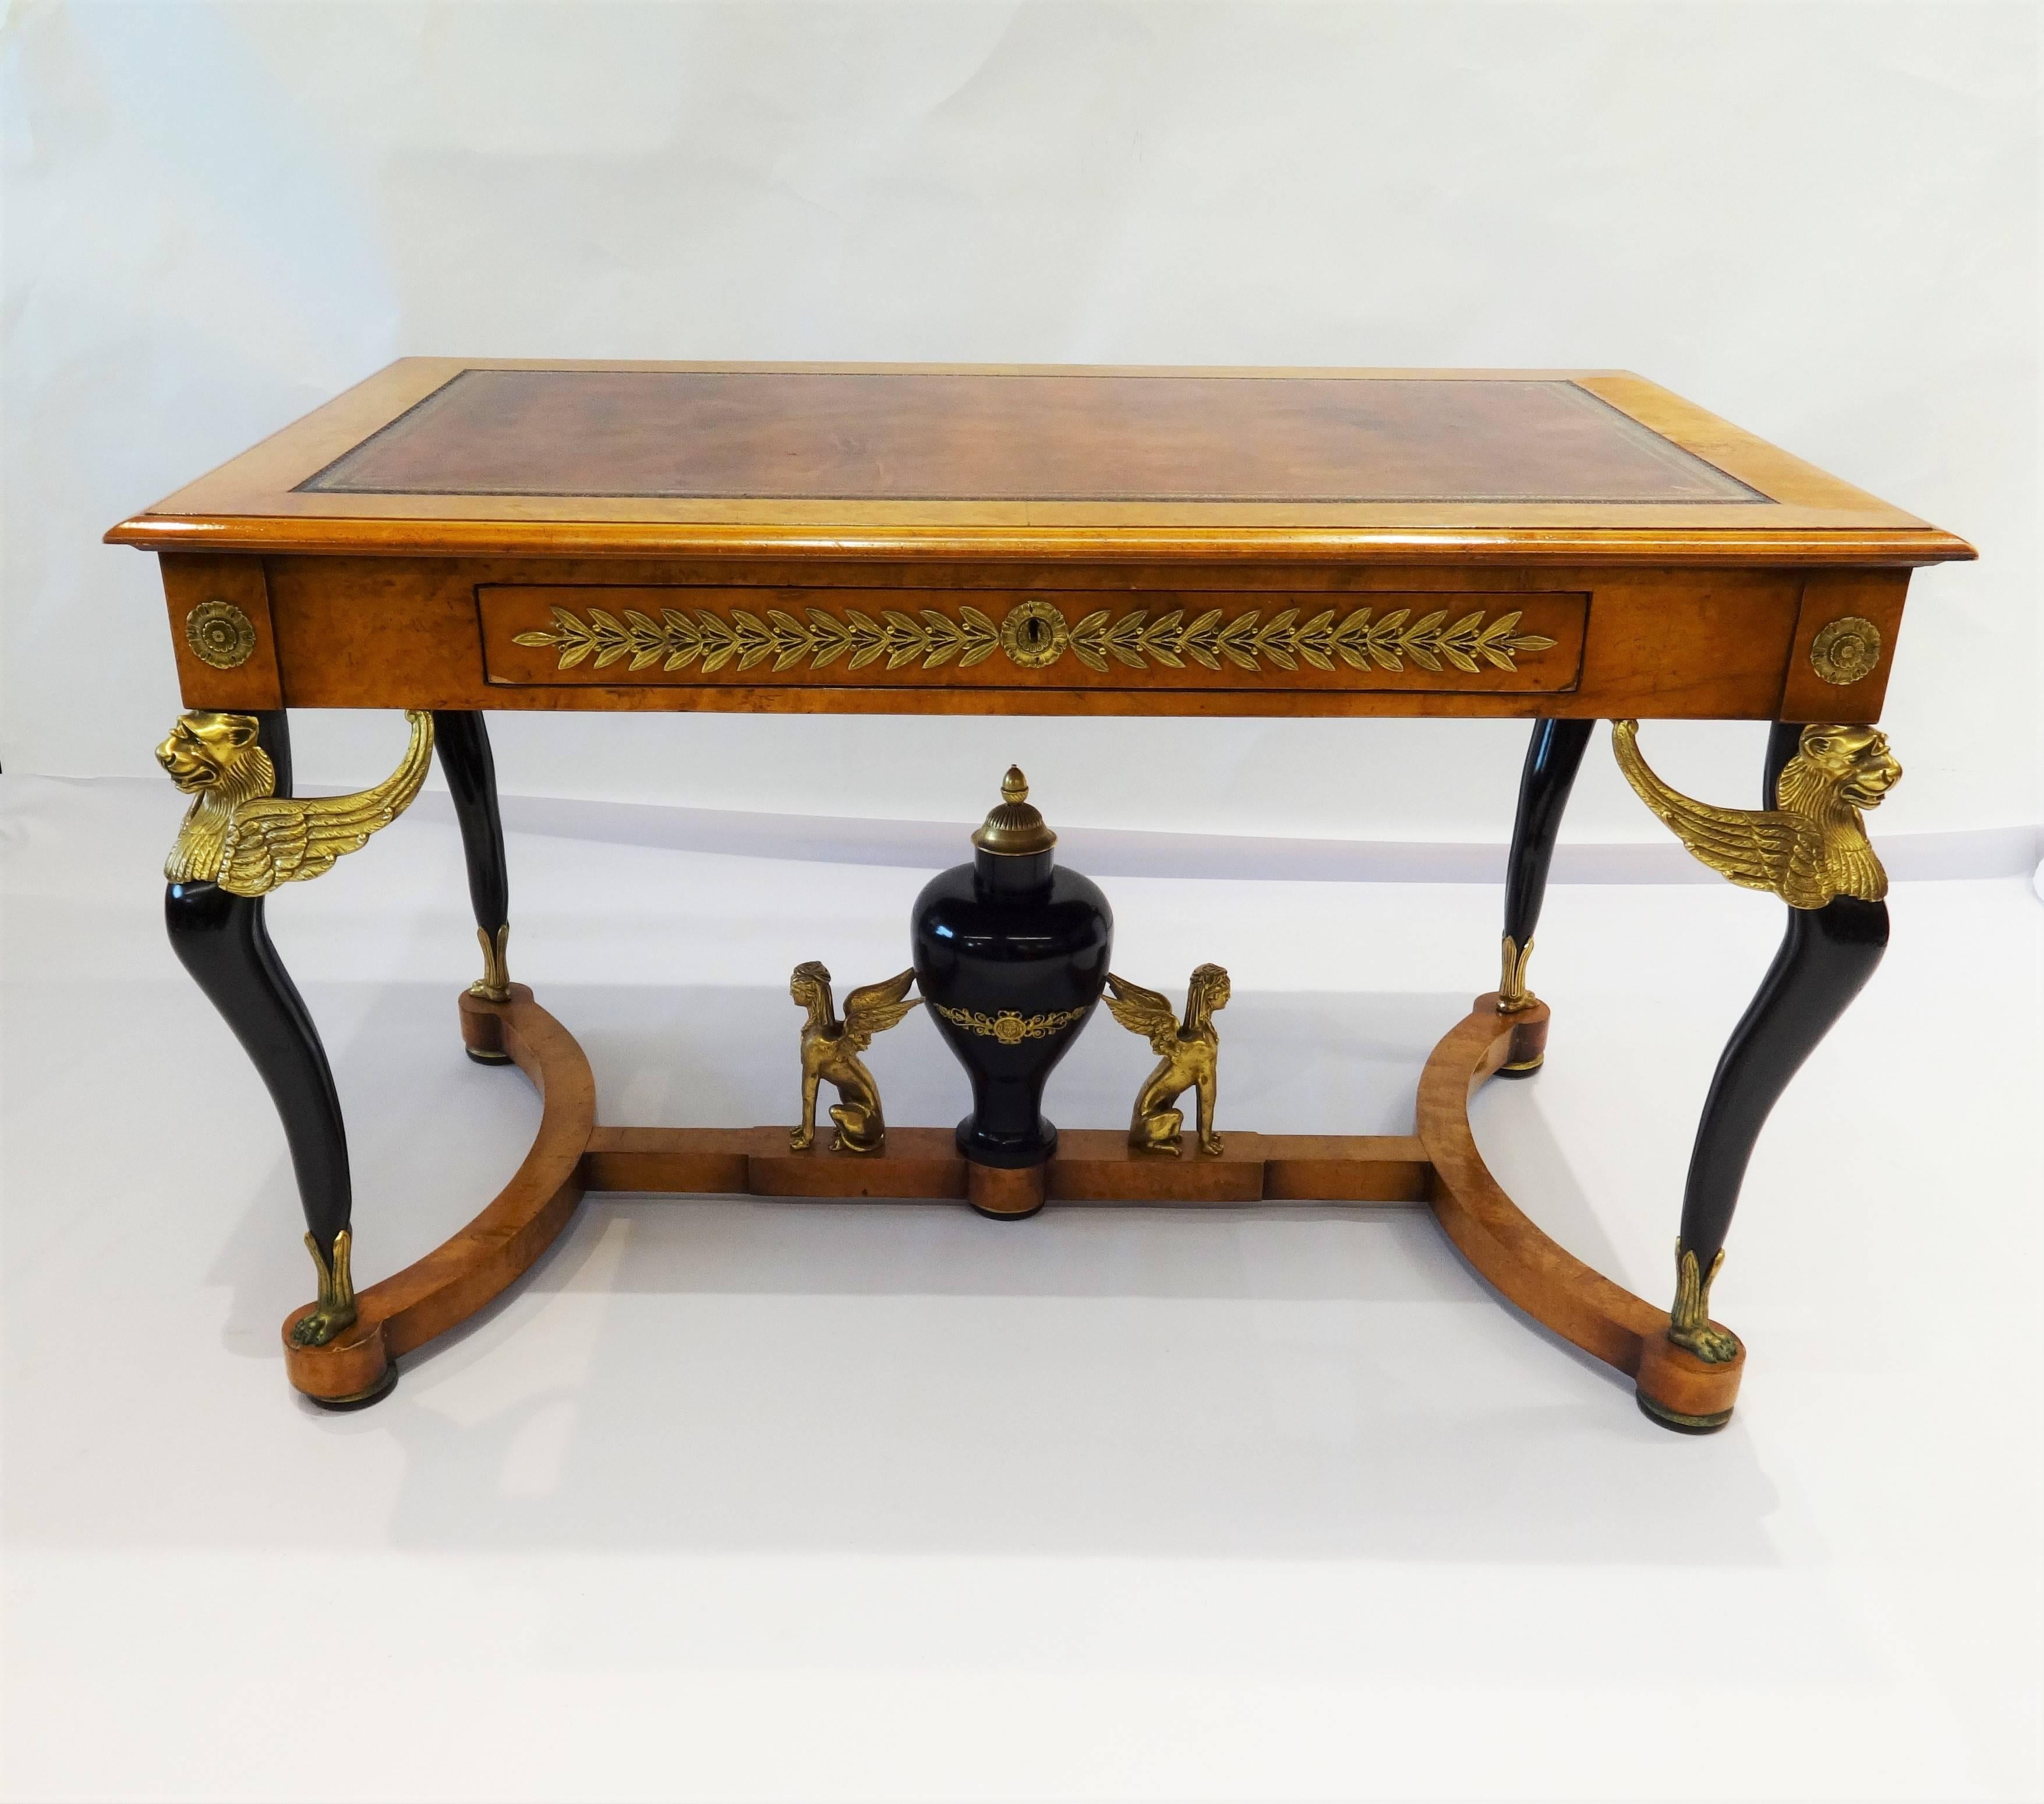 Masterful craftsmanship an illustrious example of 19th Century French furniture making at its finest. Extravagant combinations of materials, this desk is certainly no exception. Burl wood table with one drawer, bronze trim and winged griffins on